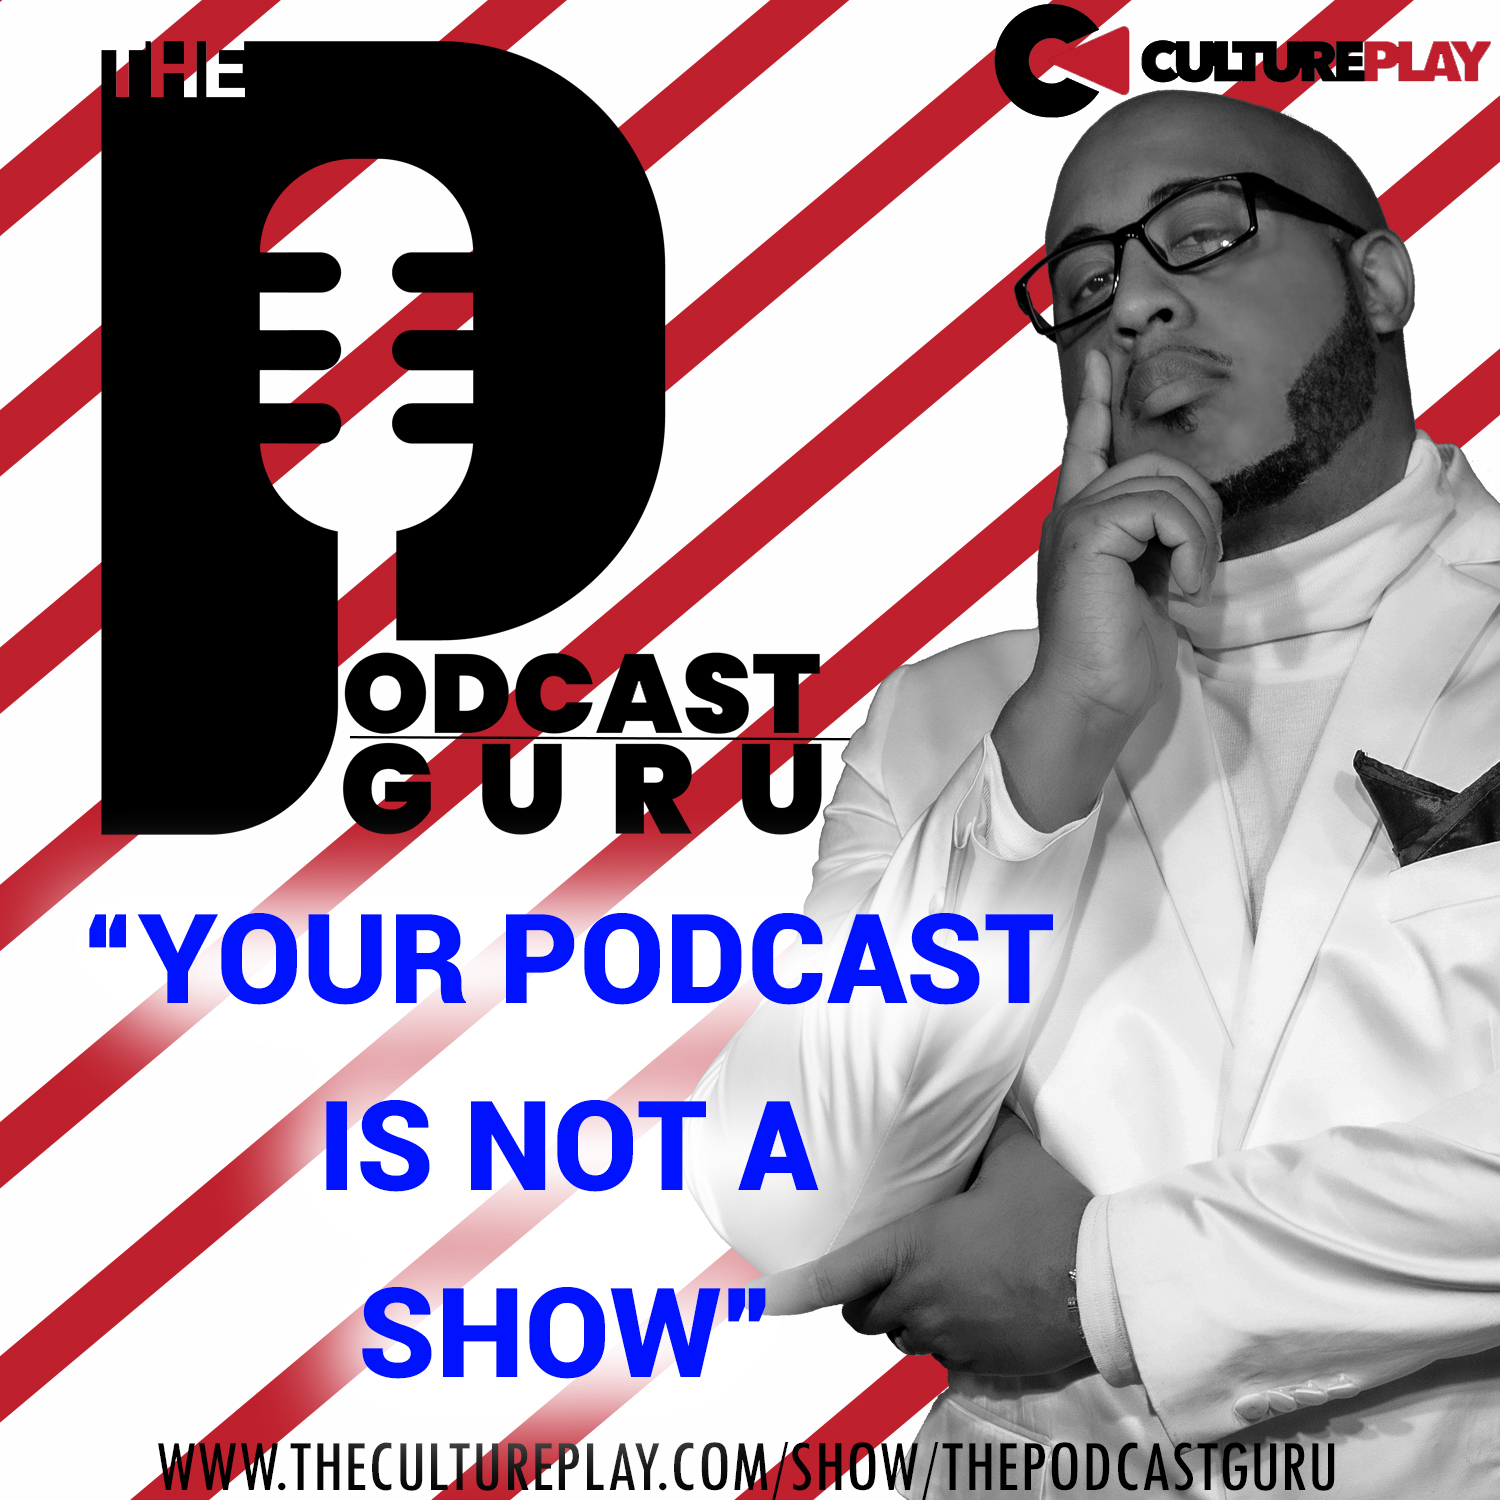 Podcast Guru - Your Podcast Is Not A Show